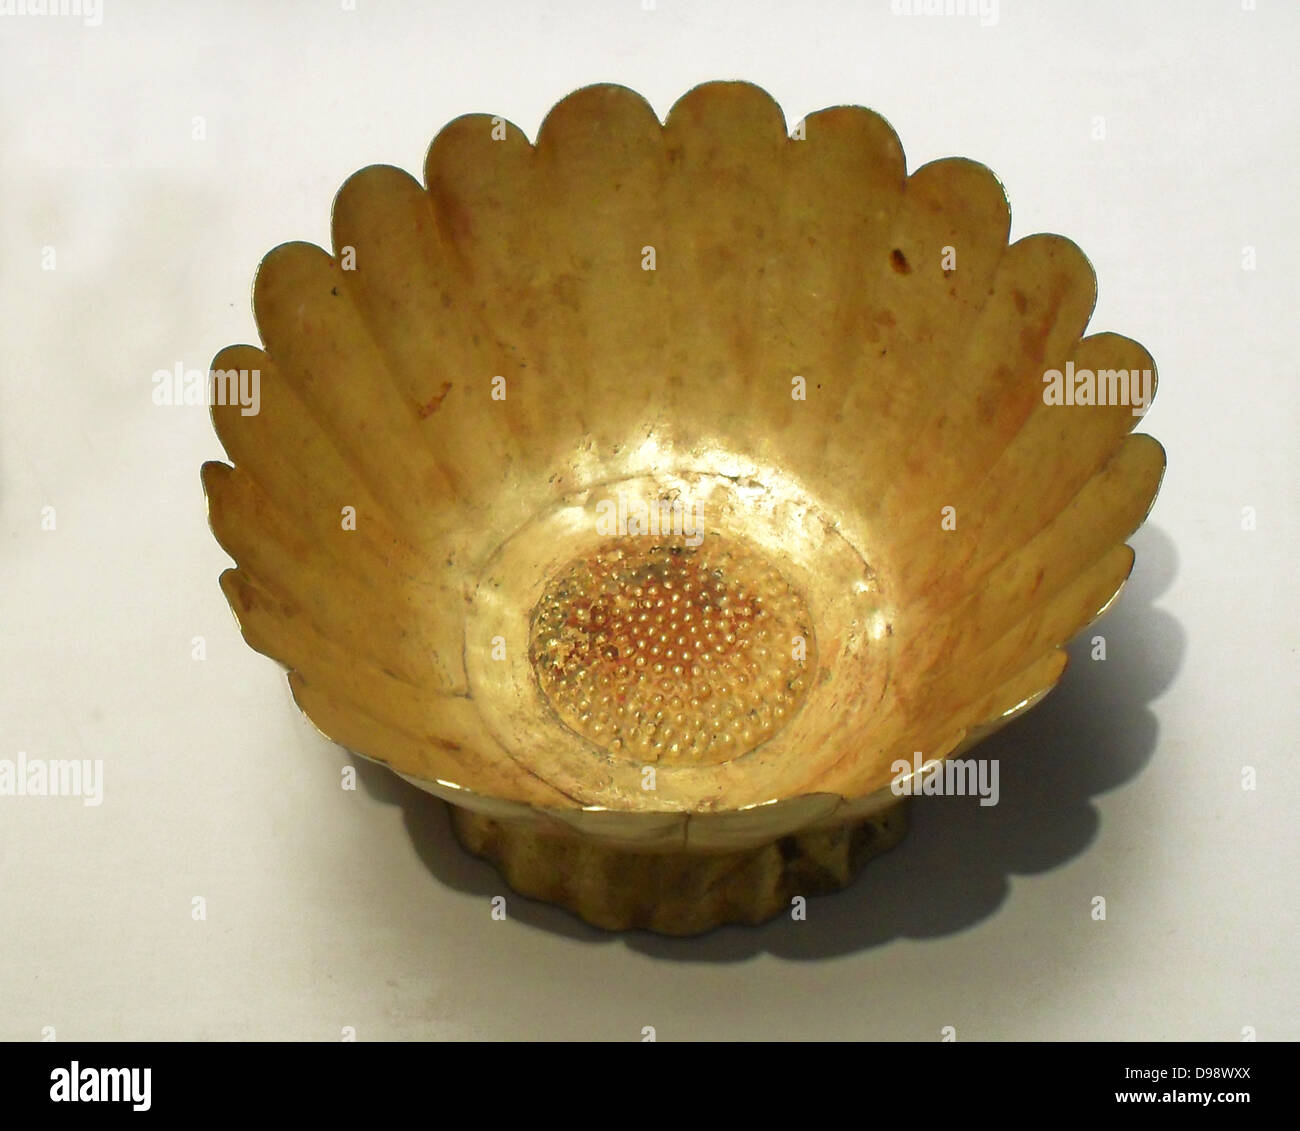 Cup shaped as a chrysanthemum flower.11th century, Northern Song dynasty (960-1127 AD) China (Northeast) Stock Photo